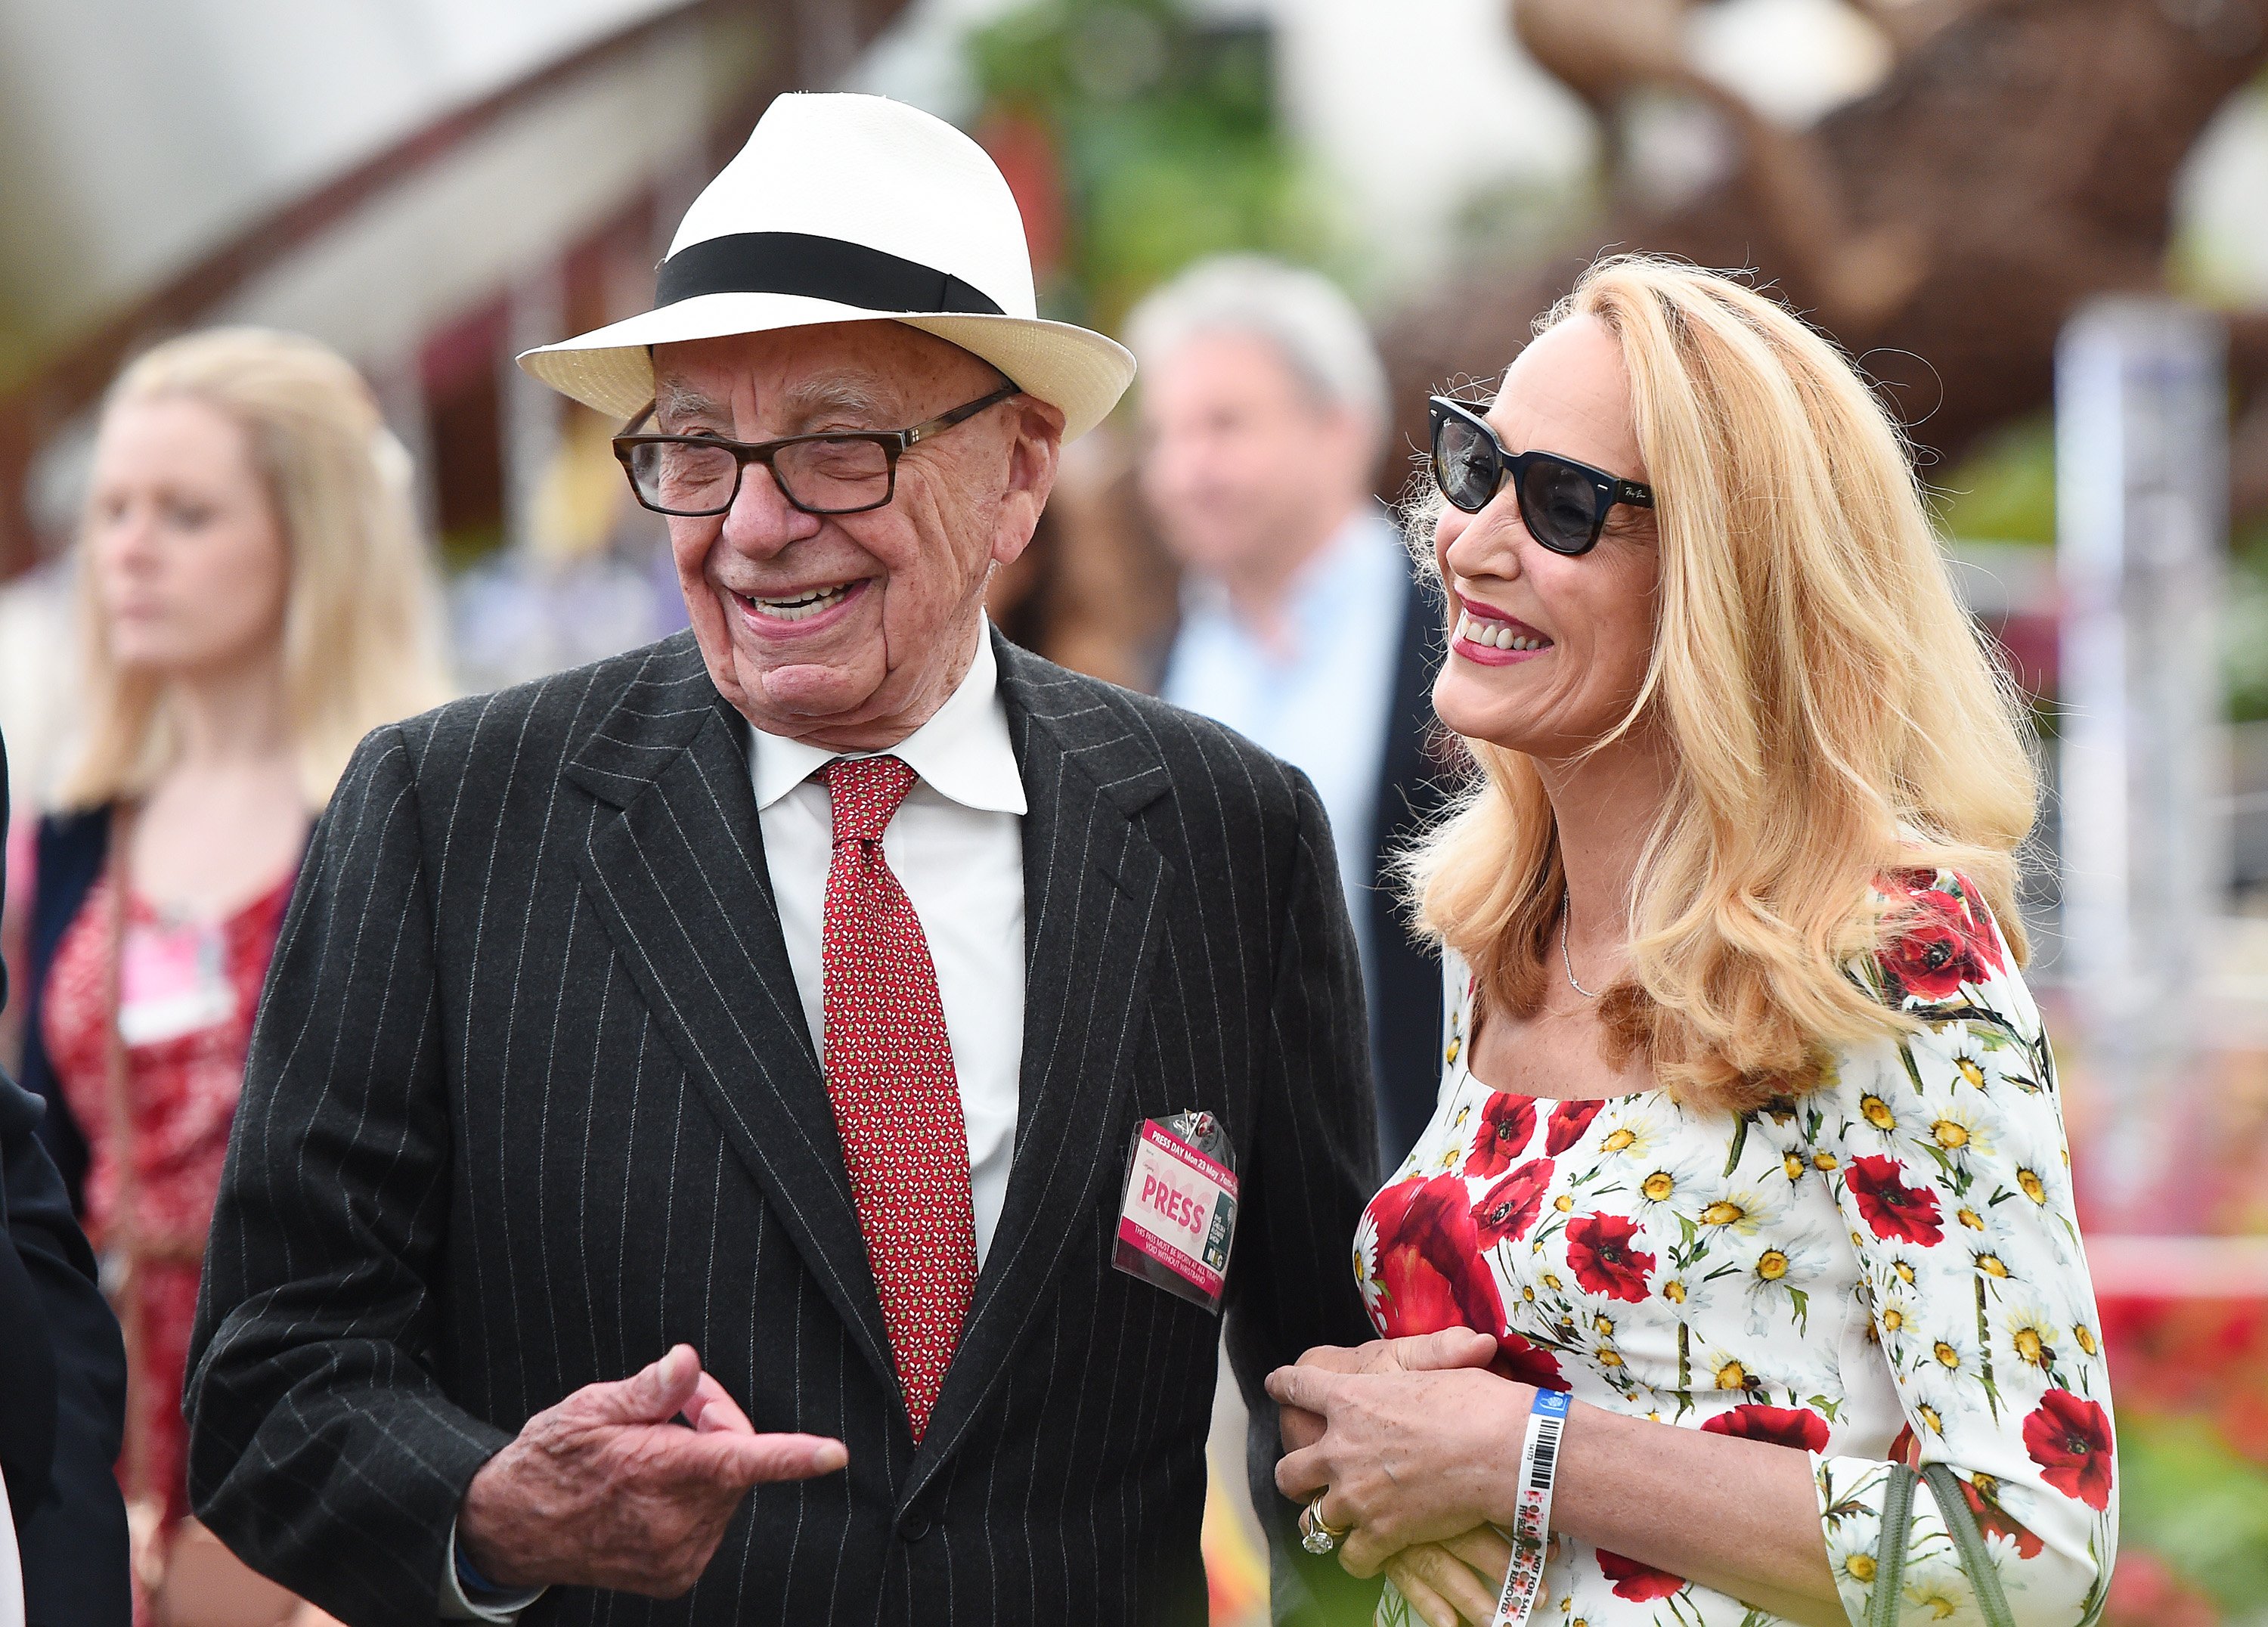 Rupert Murdoch and Jerry Hall attend Chelsea Flower Show press day at Royal Hospital Chelsea on May 23, 2016, in London, England. | Source: Getty Images